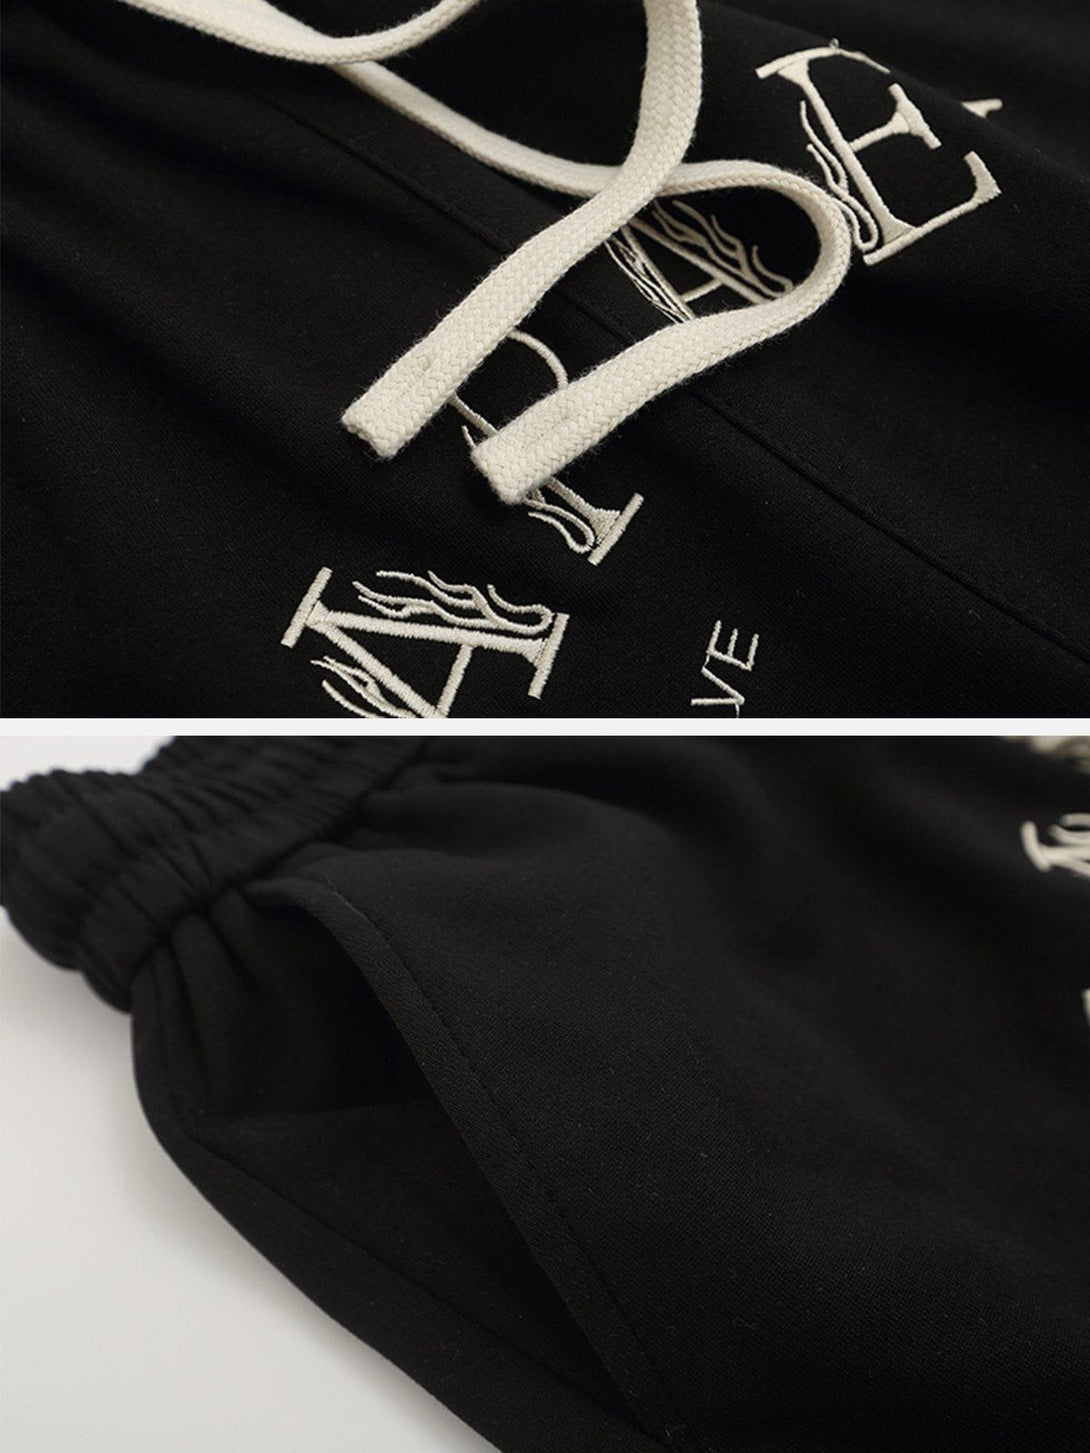 Levefly - Ring Embroidery Letter Shorts - Streetwear Fashion - levefly.com